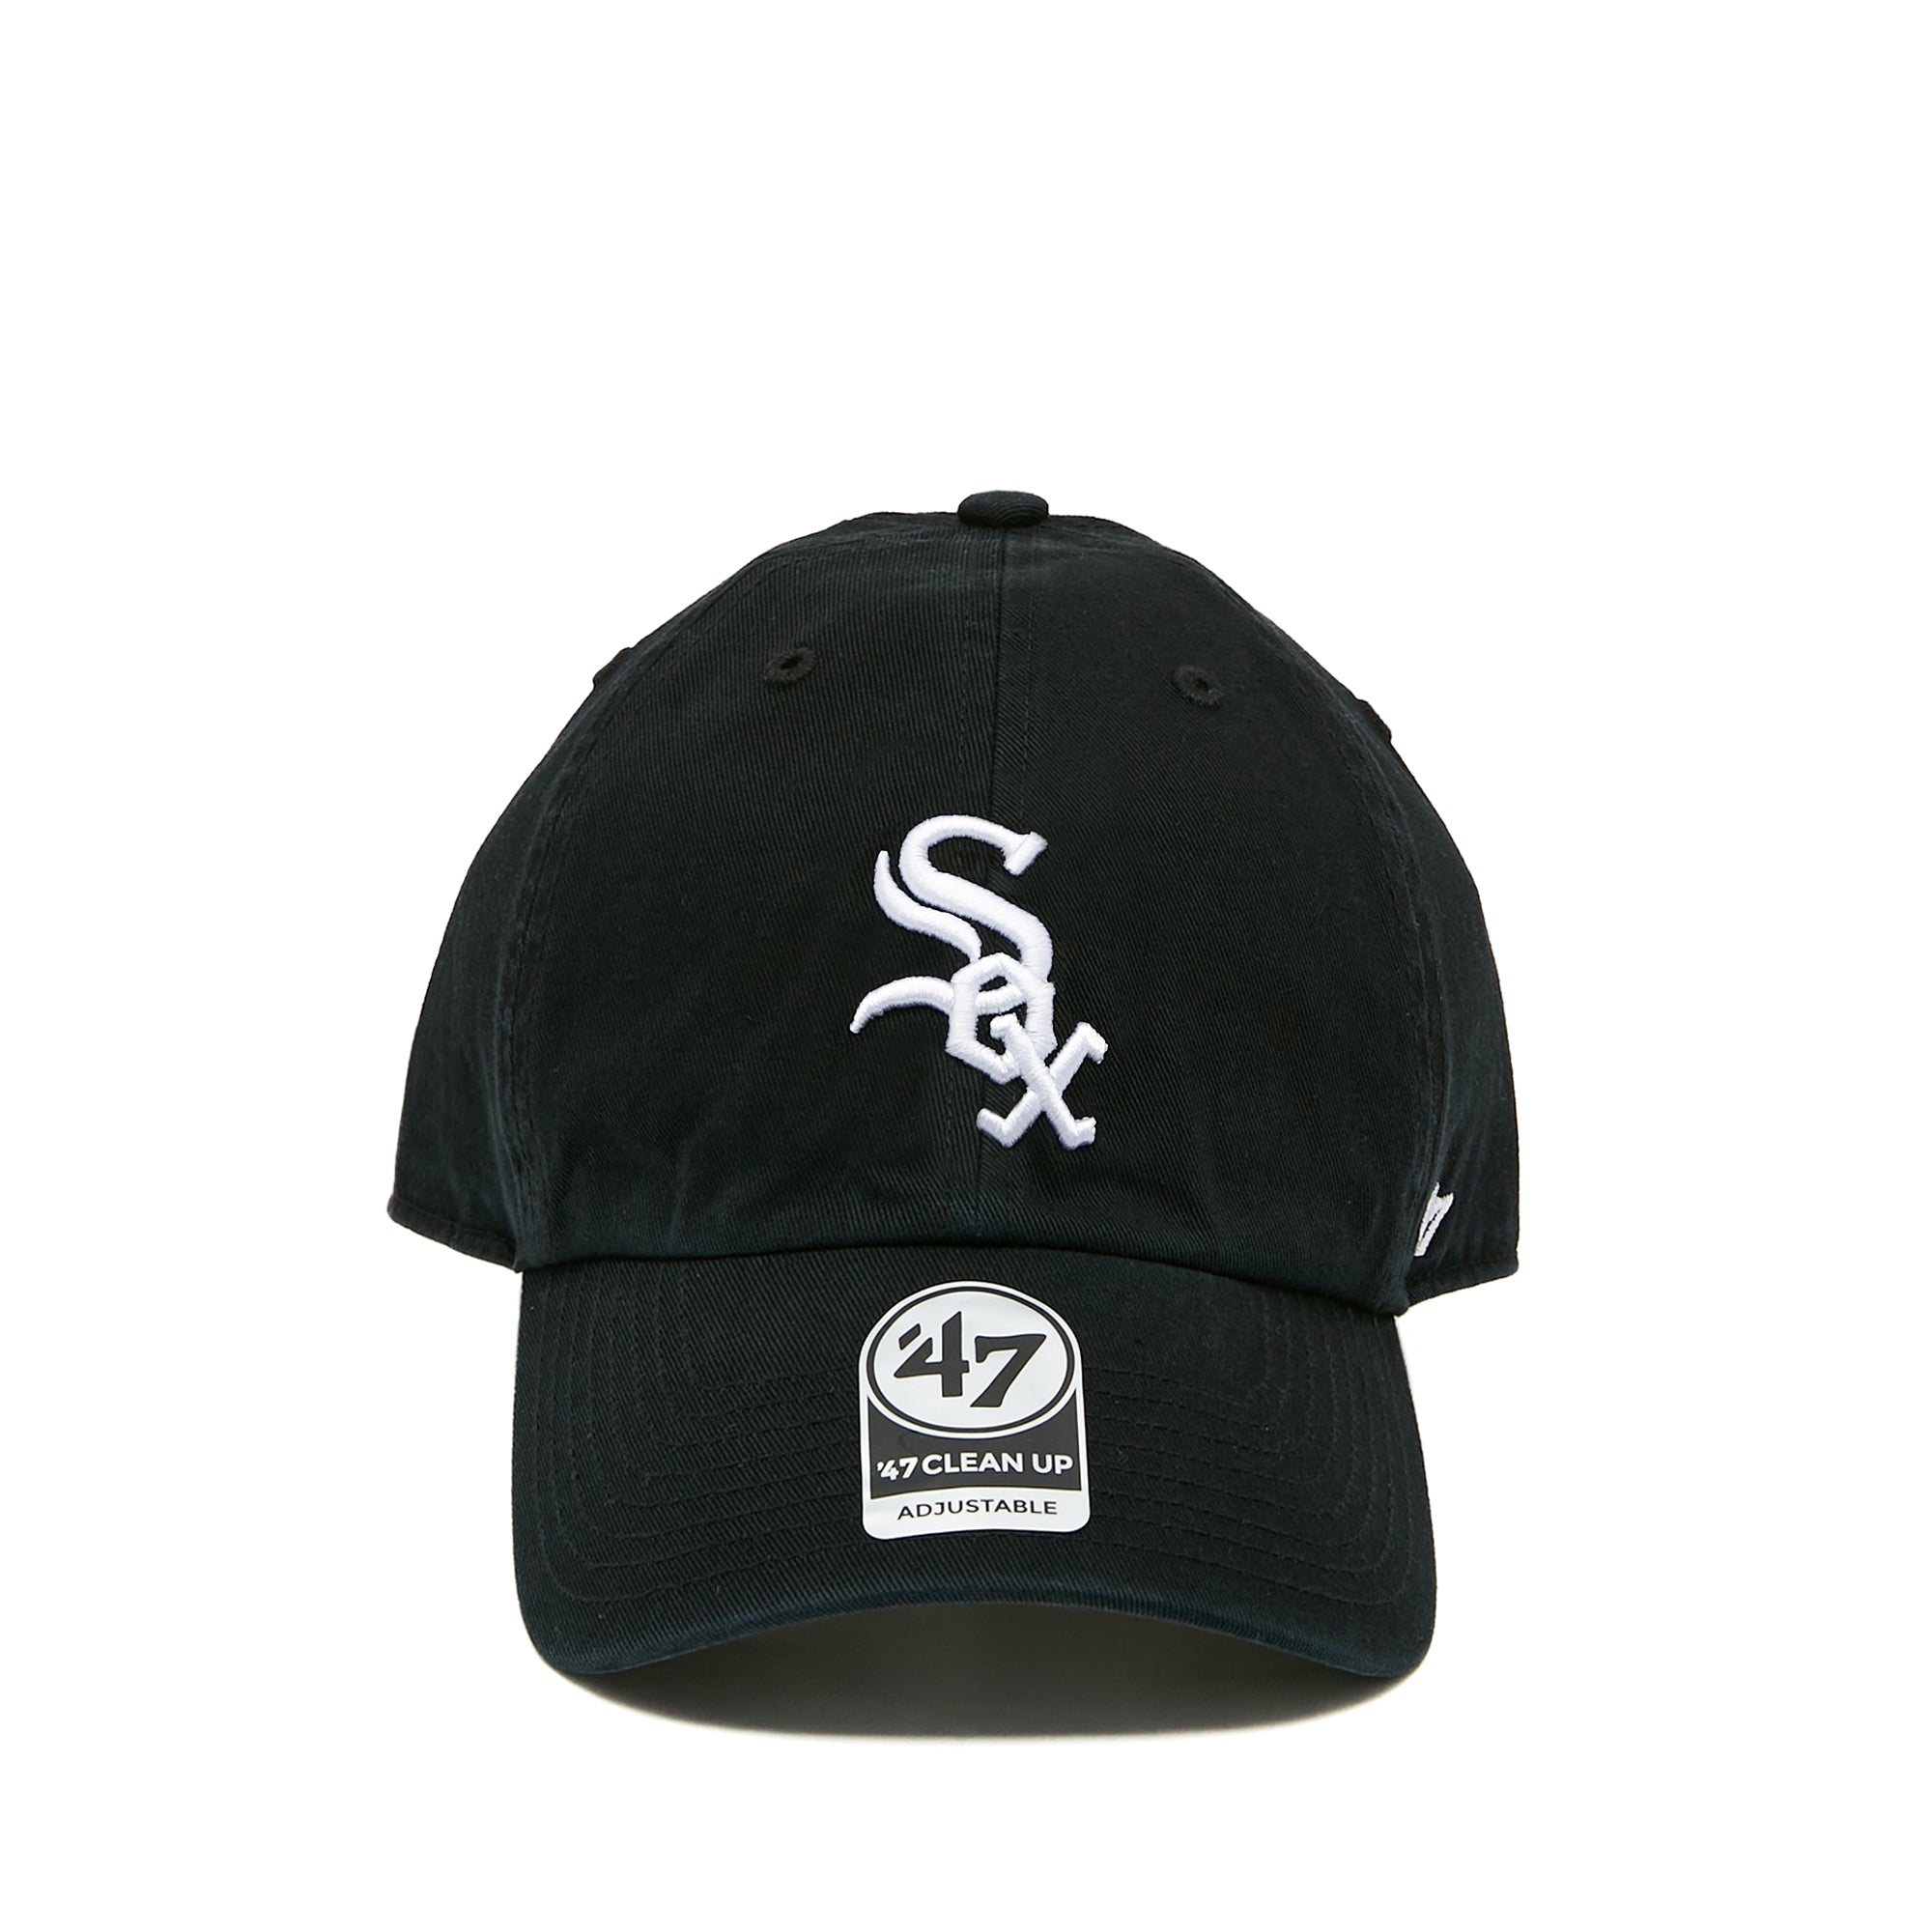 MLB Chicago White Sox '47 Clean Up Cap Black One Size